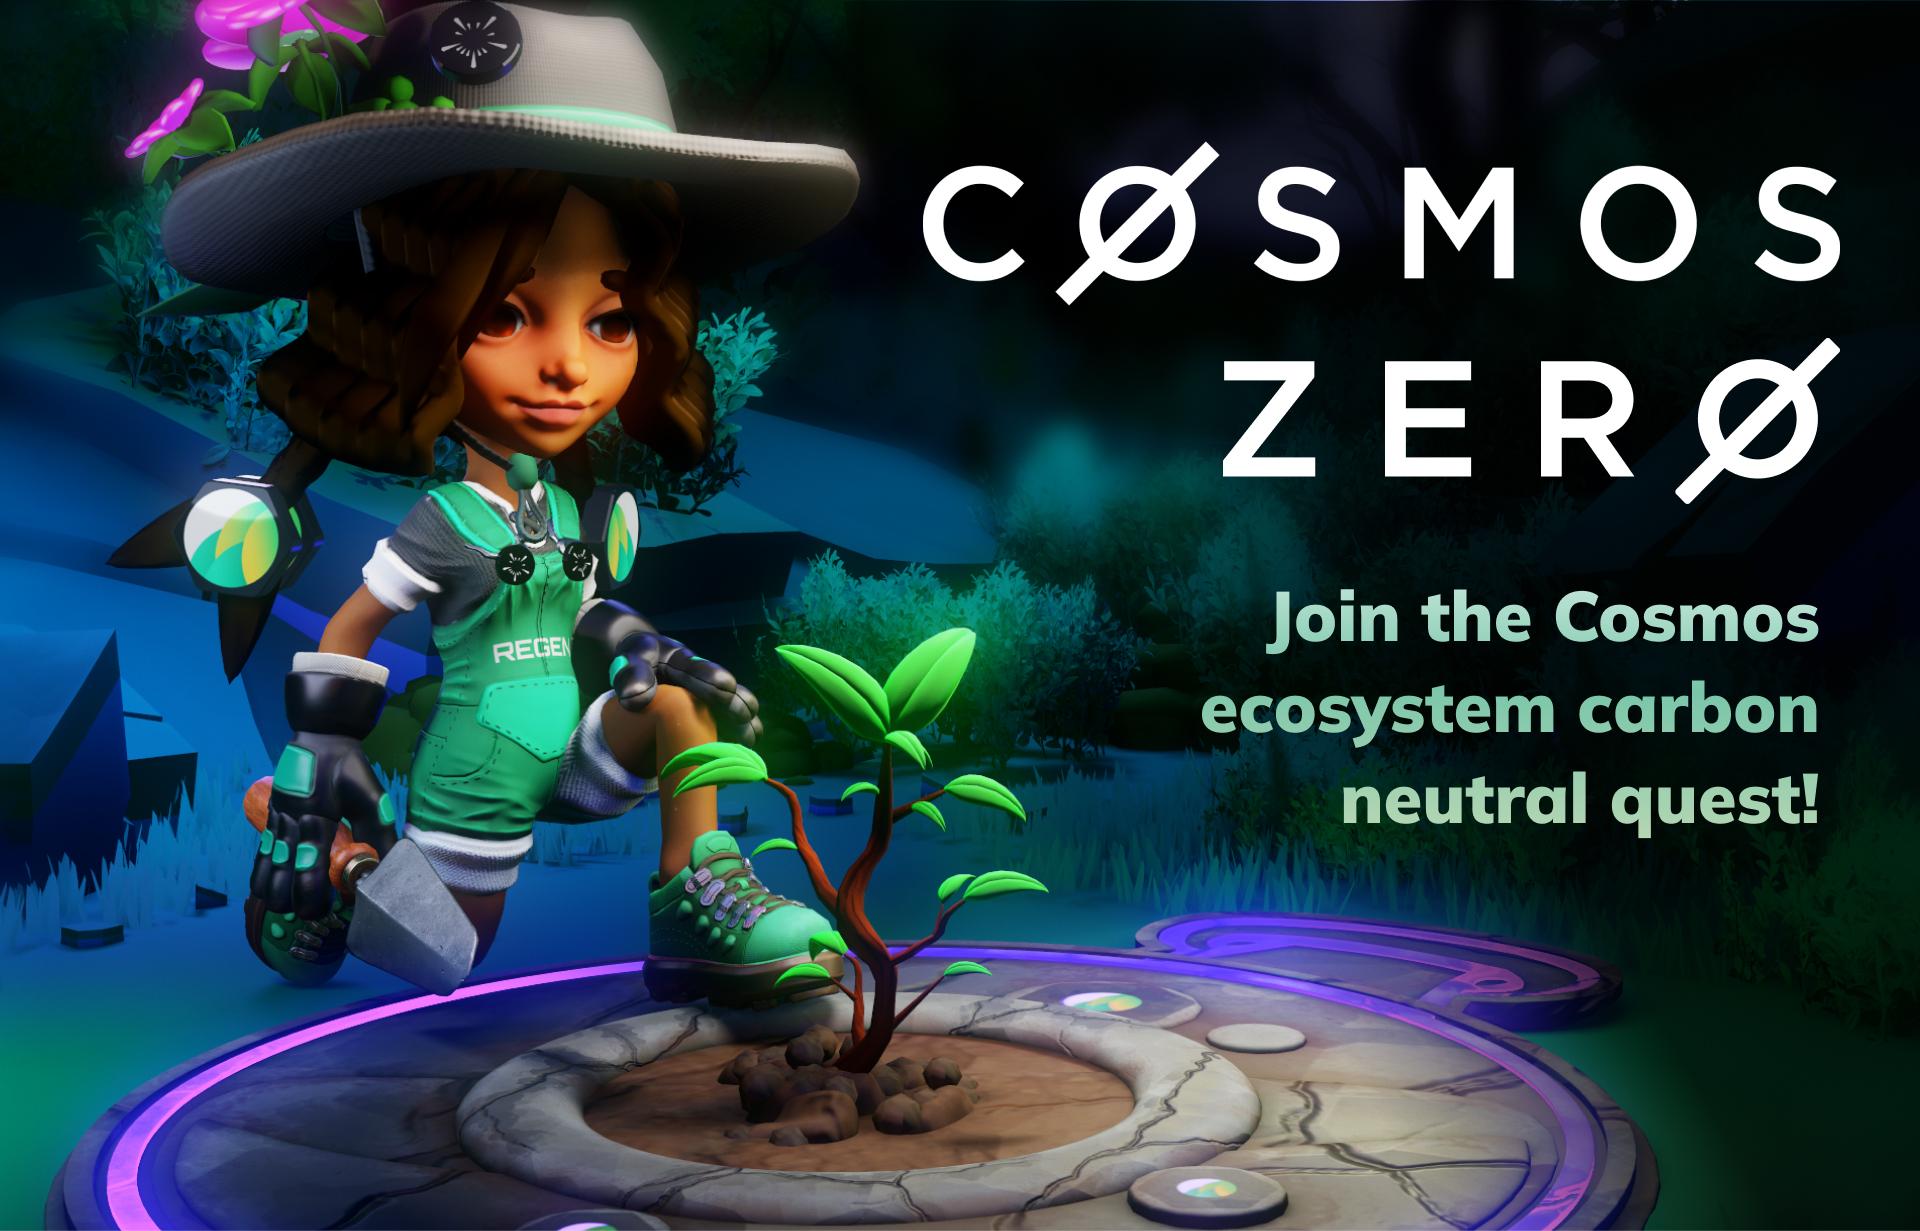 Cosmos Zero: Join the Cosmos ecosystem carbon neutral quest!